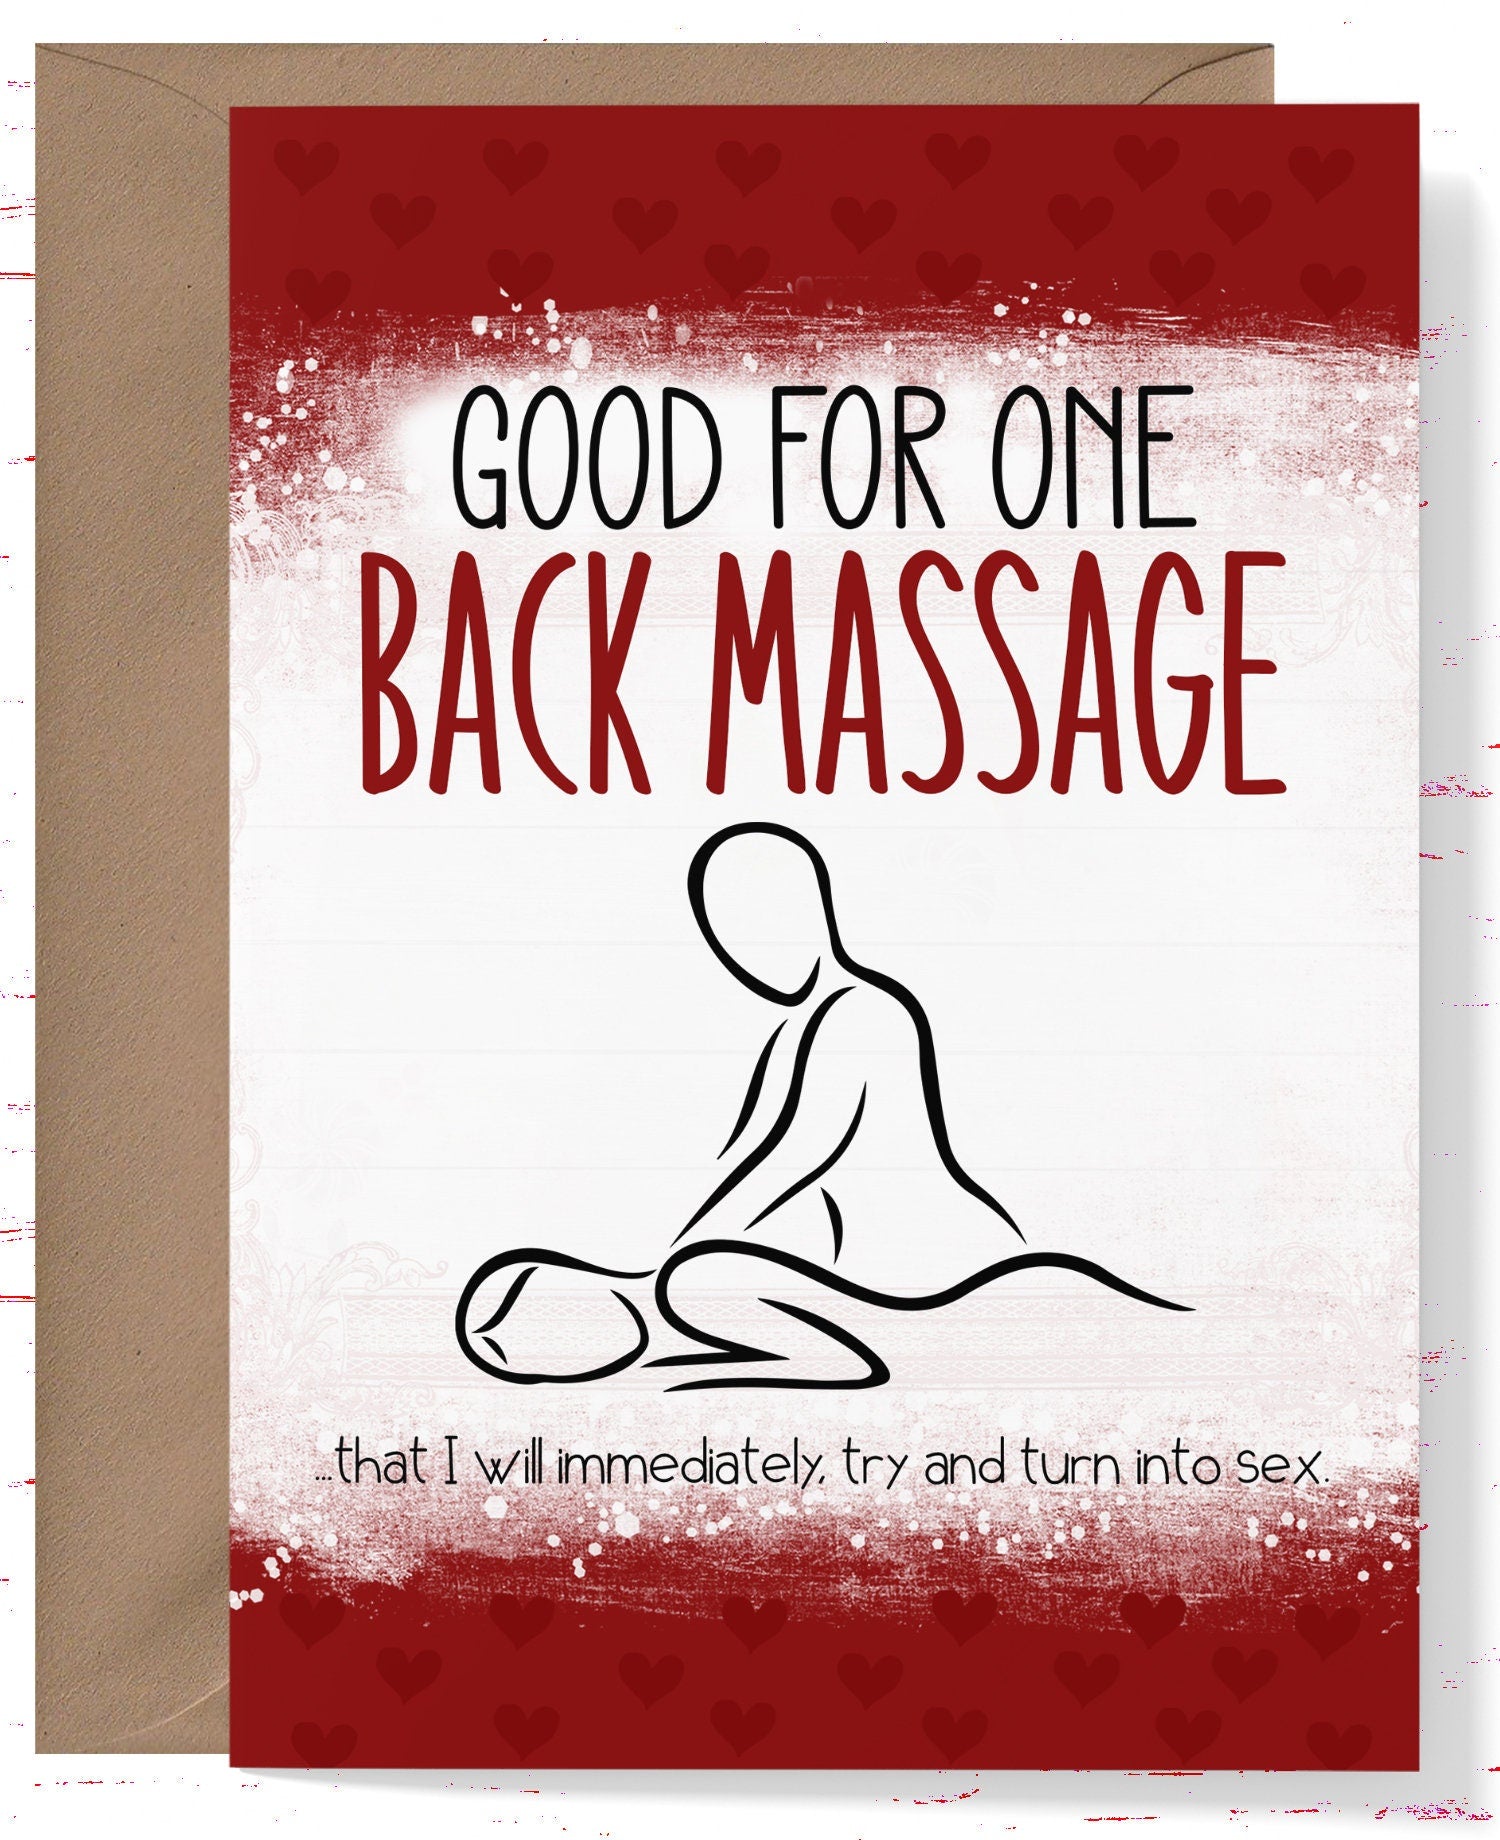 Naughty Valentines Card for Her, Happy Valentines Day Free Massage Va